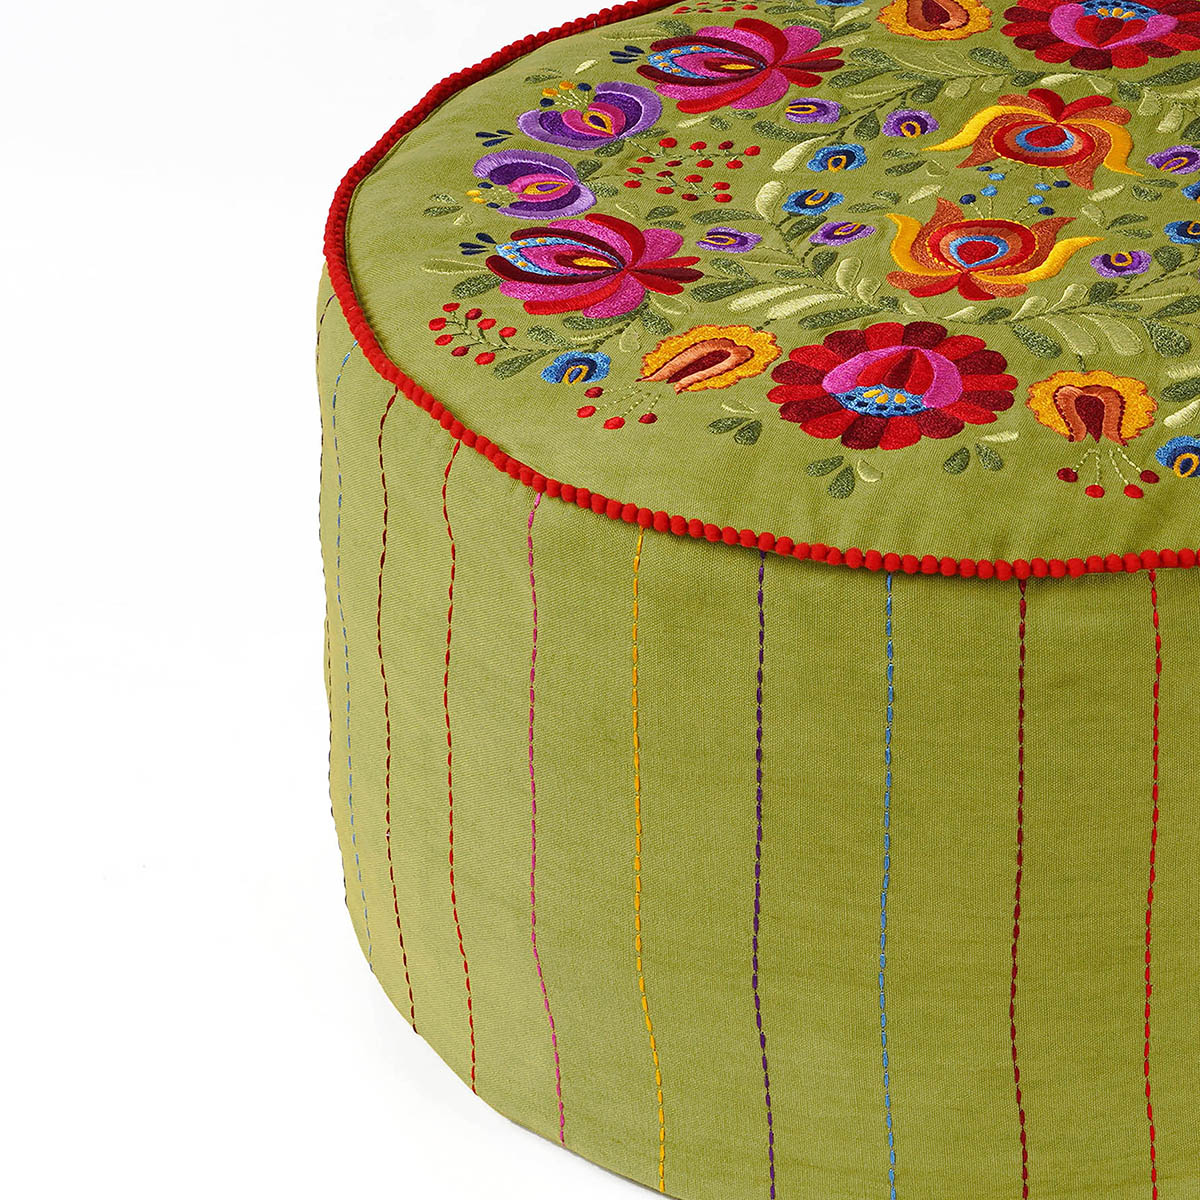 Matyo - Embroidered boho pouf cover, Green with multicolour rose embroidery ottoman cover